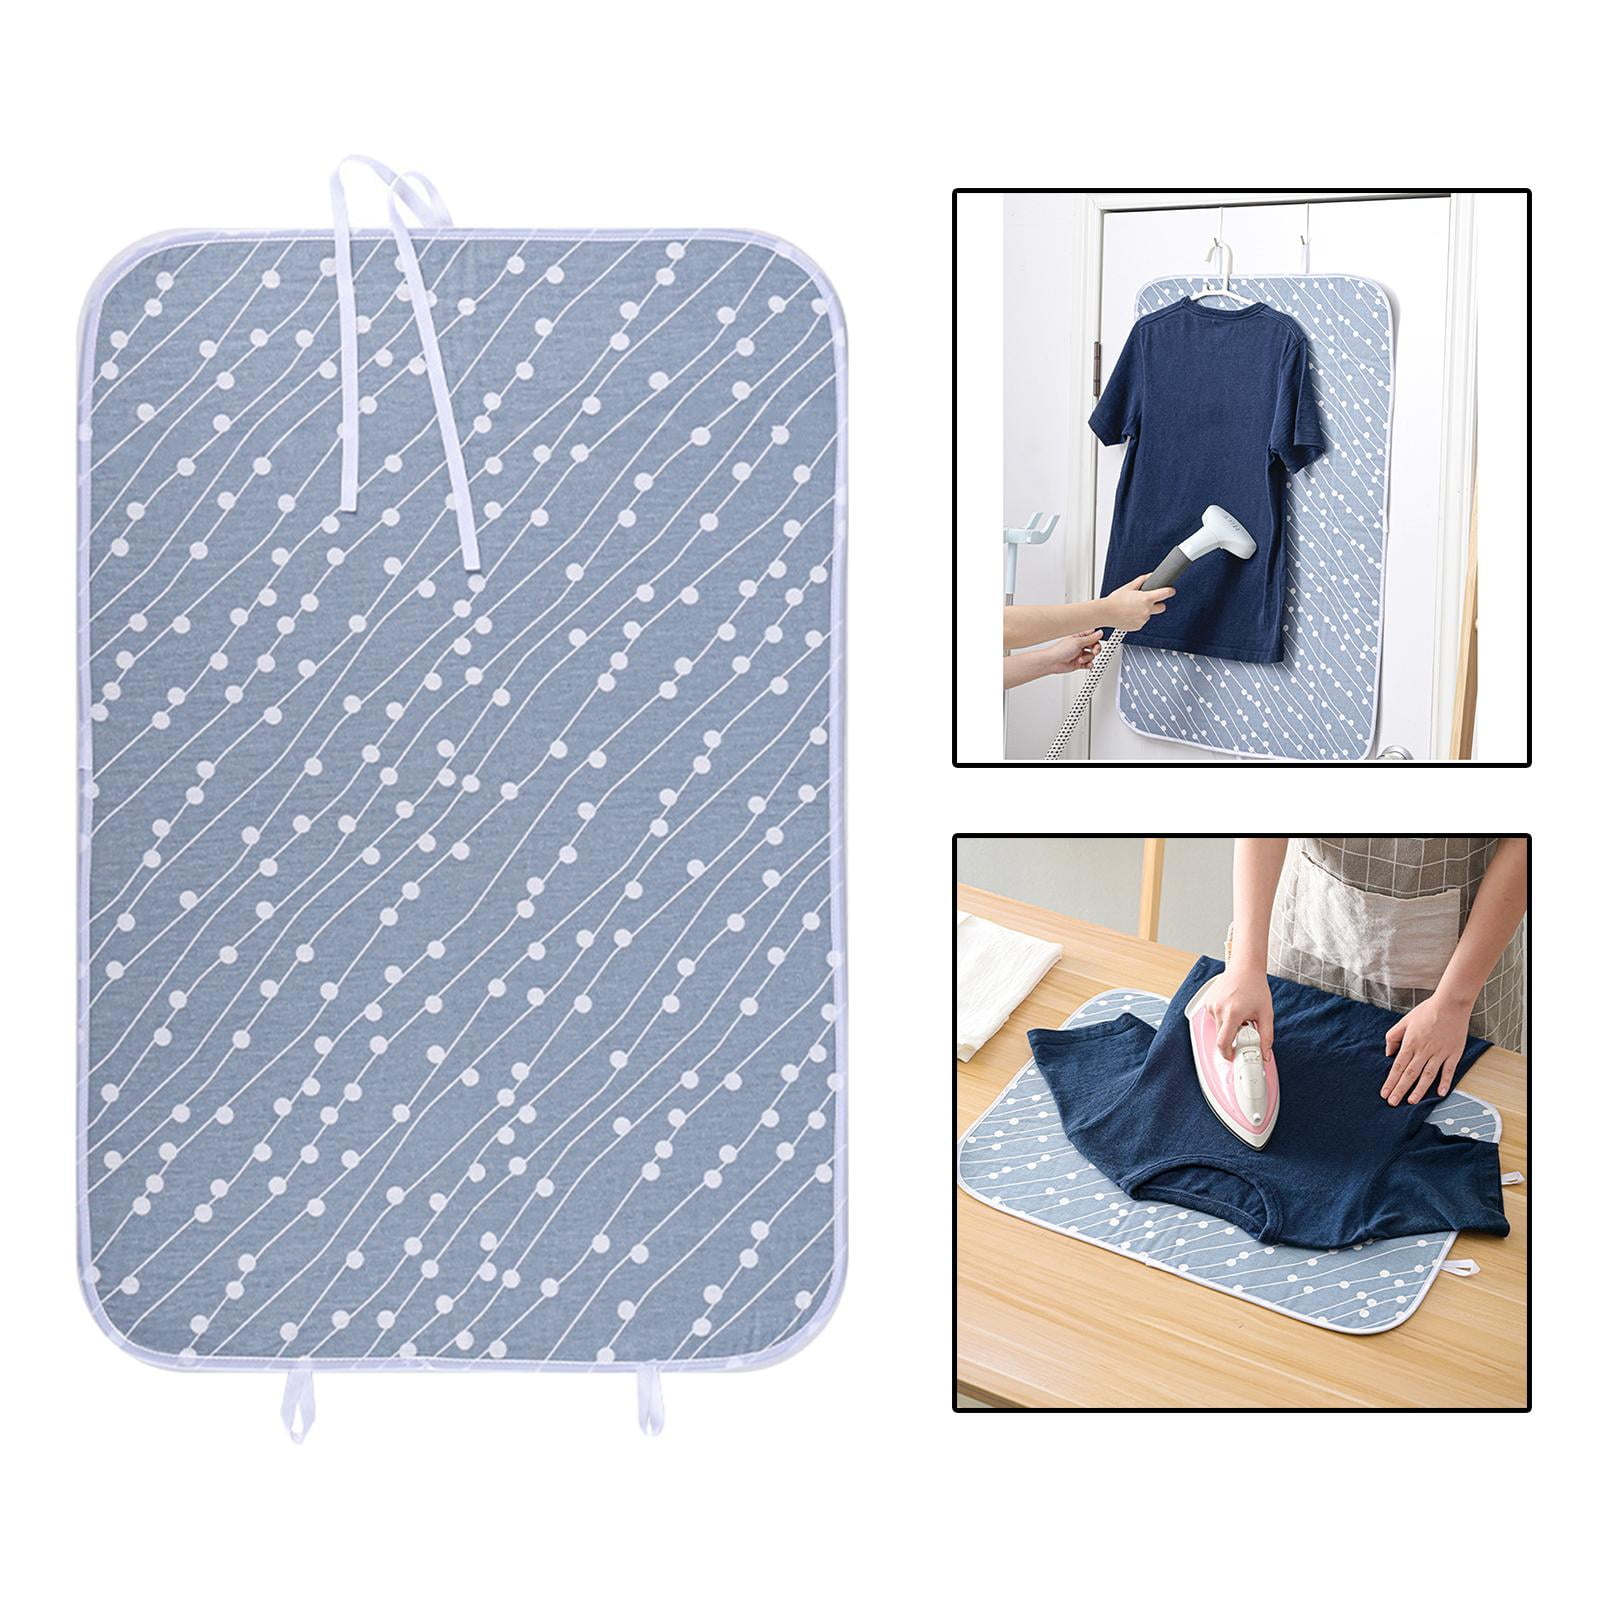  Abstract Cat Ironing Mat for Table Top Portable